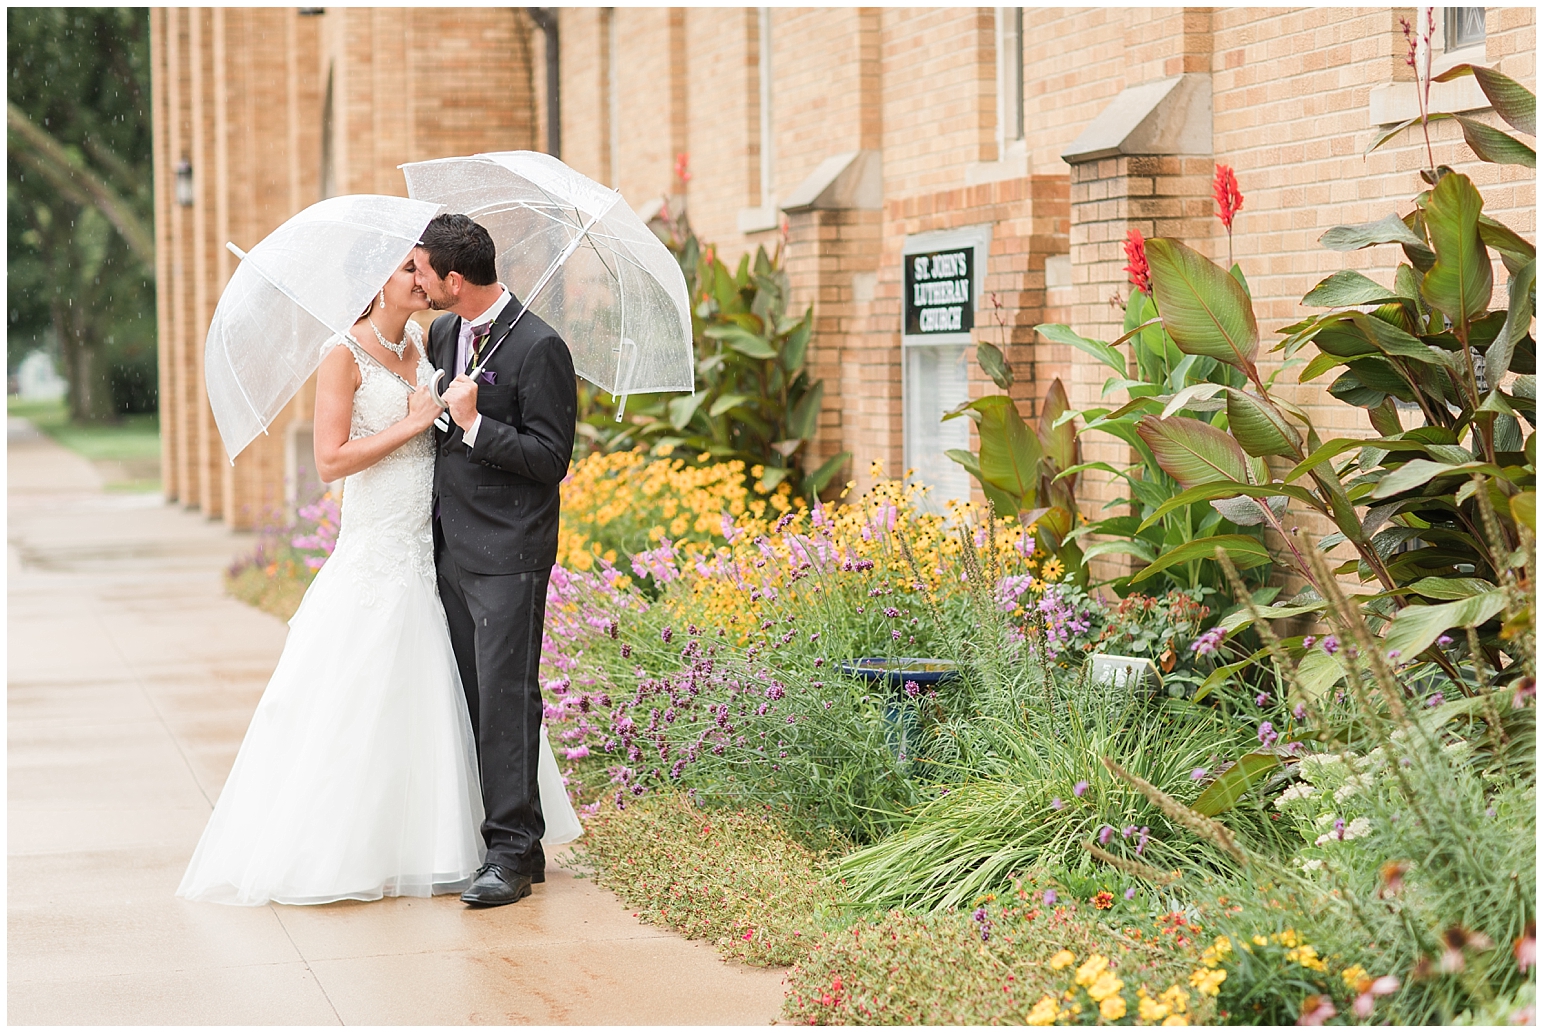 Rainy Day Bride and Groom Portraits | Prairie Winds Event Center Wedding in Orange City, Iowa shot by Jessica Brees Photo & Video